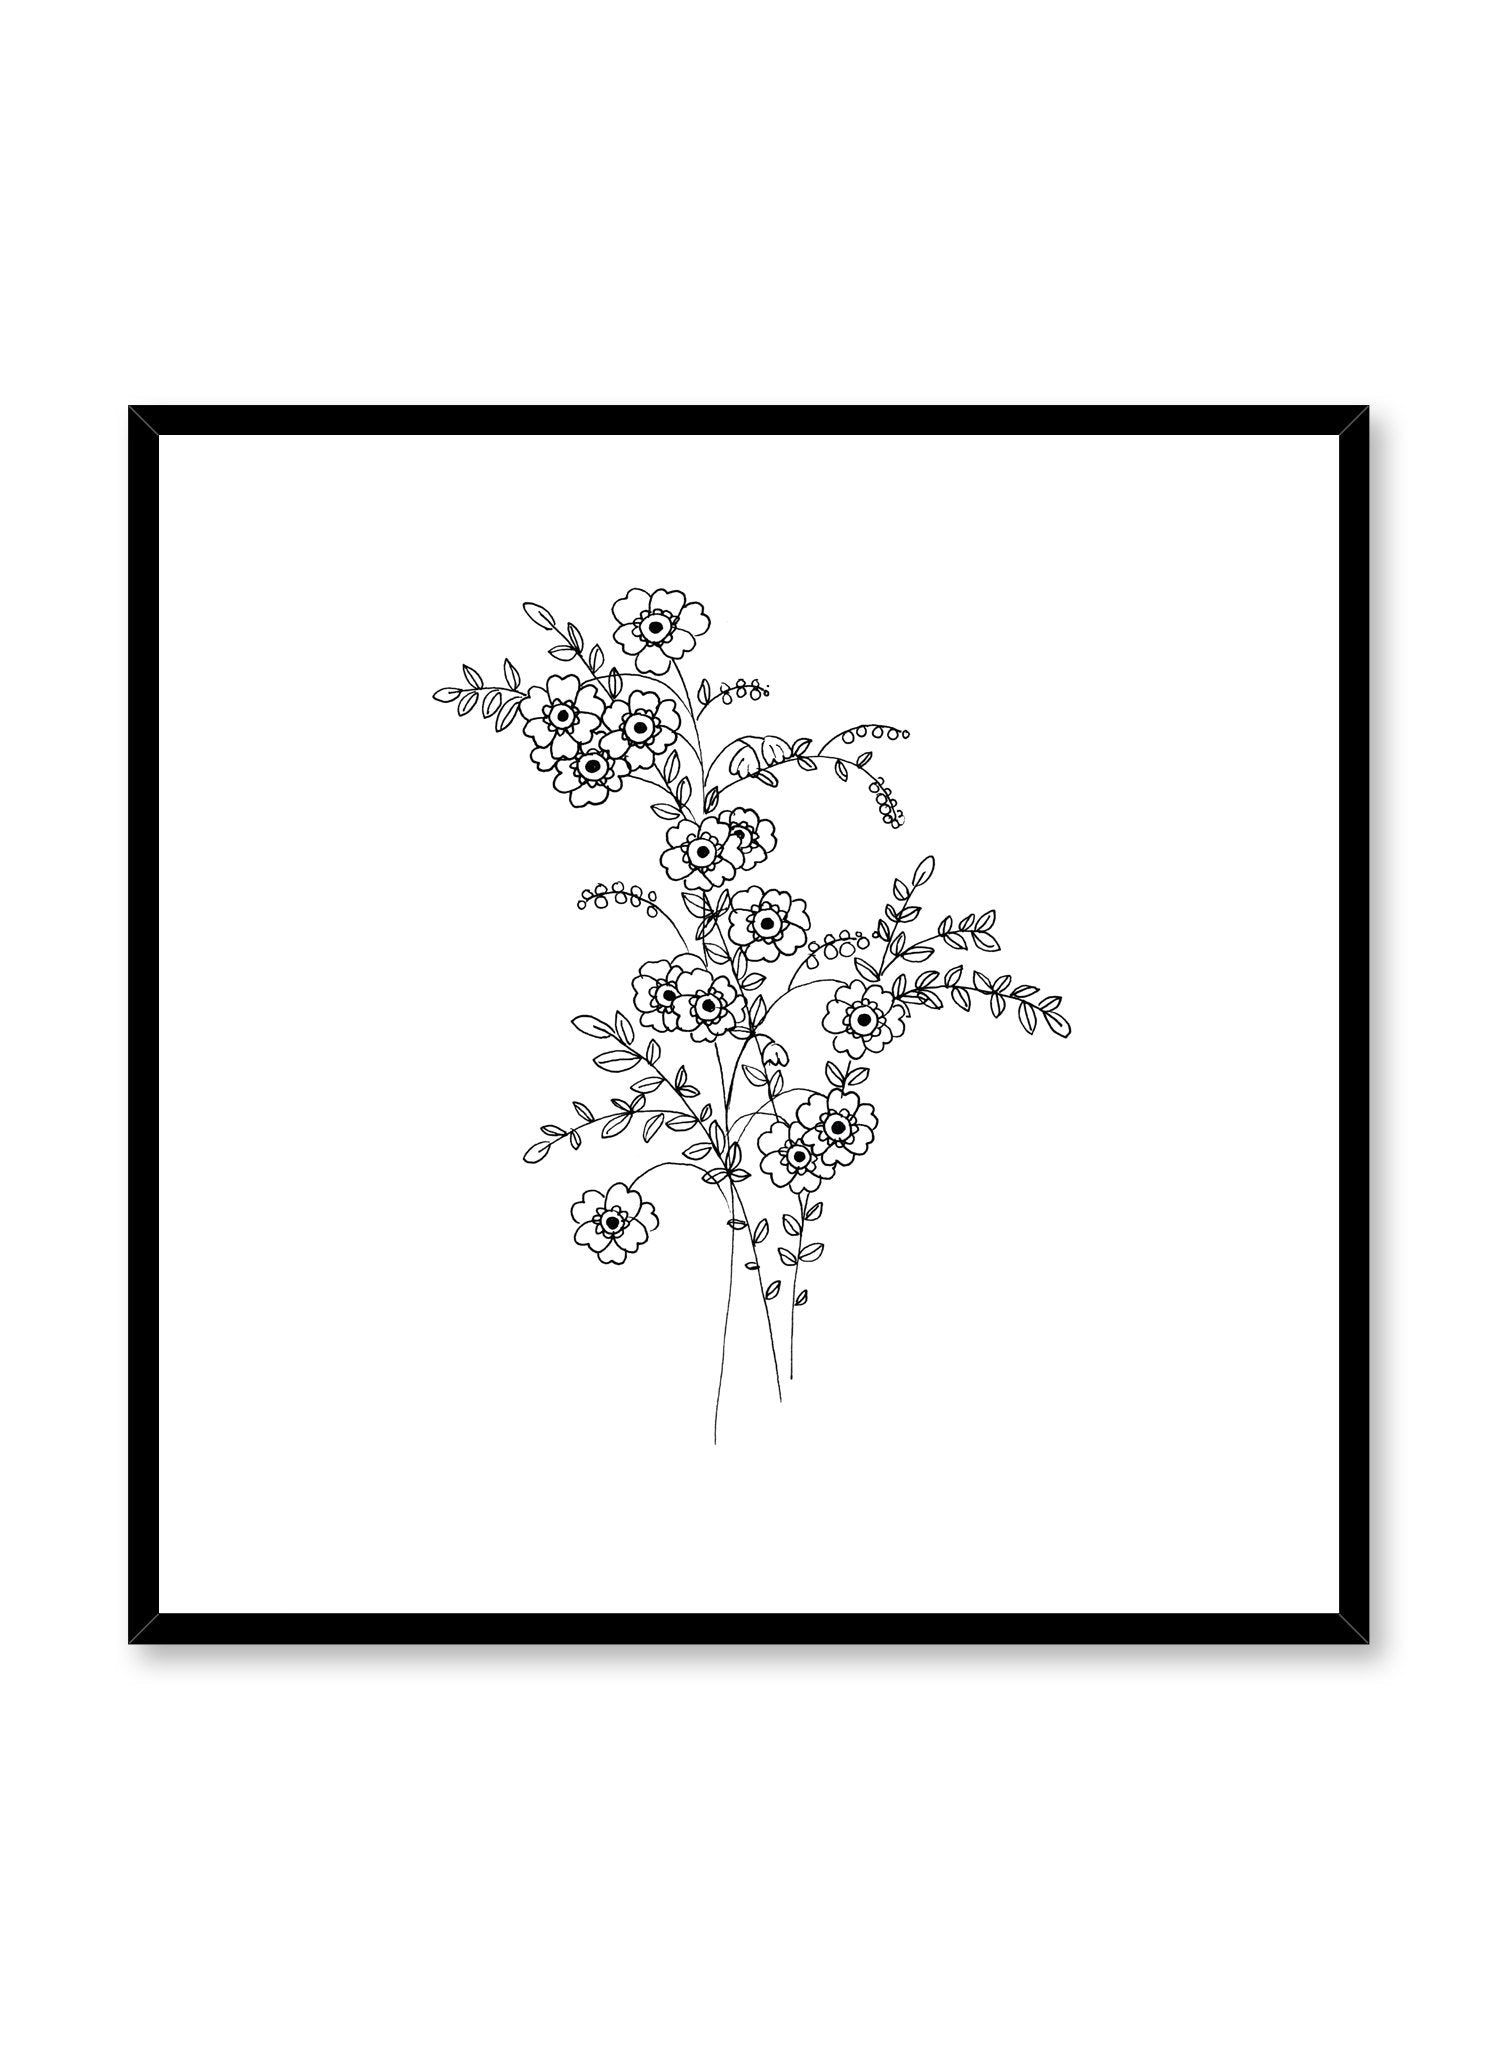 Modern minimalist poster by Opposite Wall with abstract line art illustration of Petite Petals